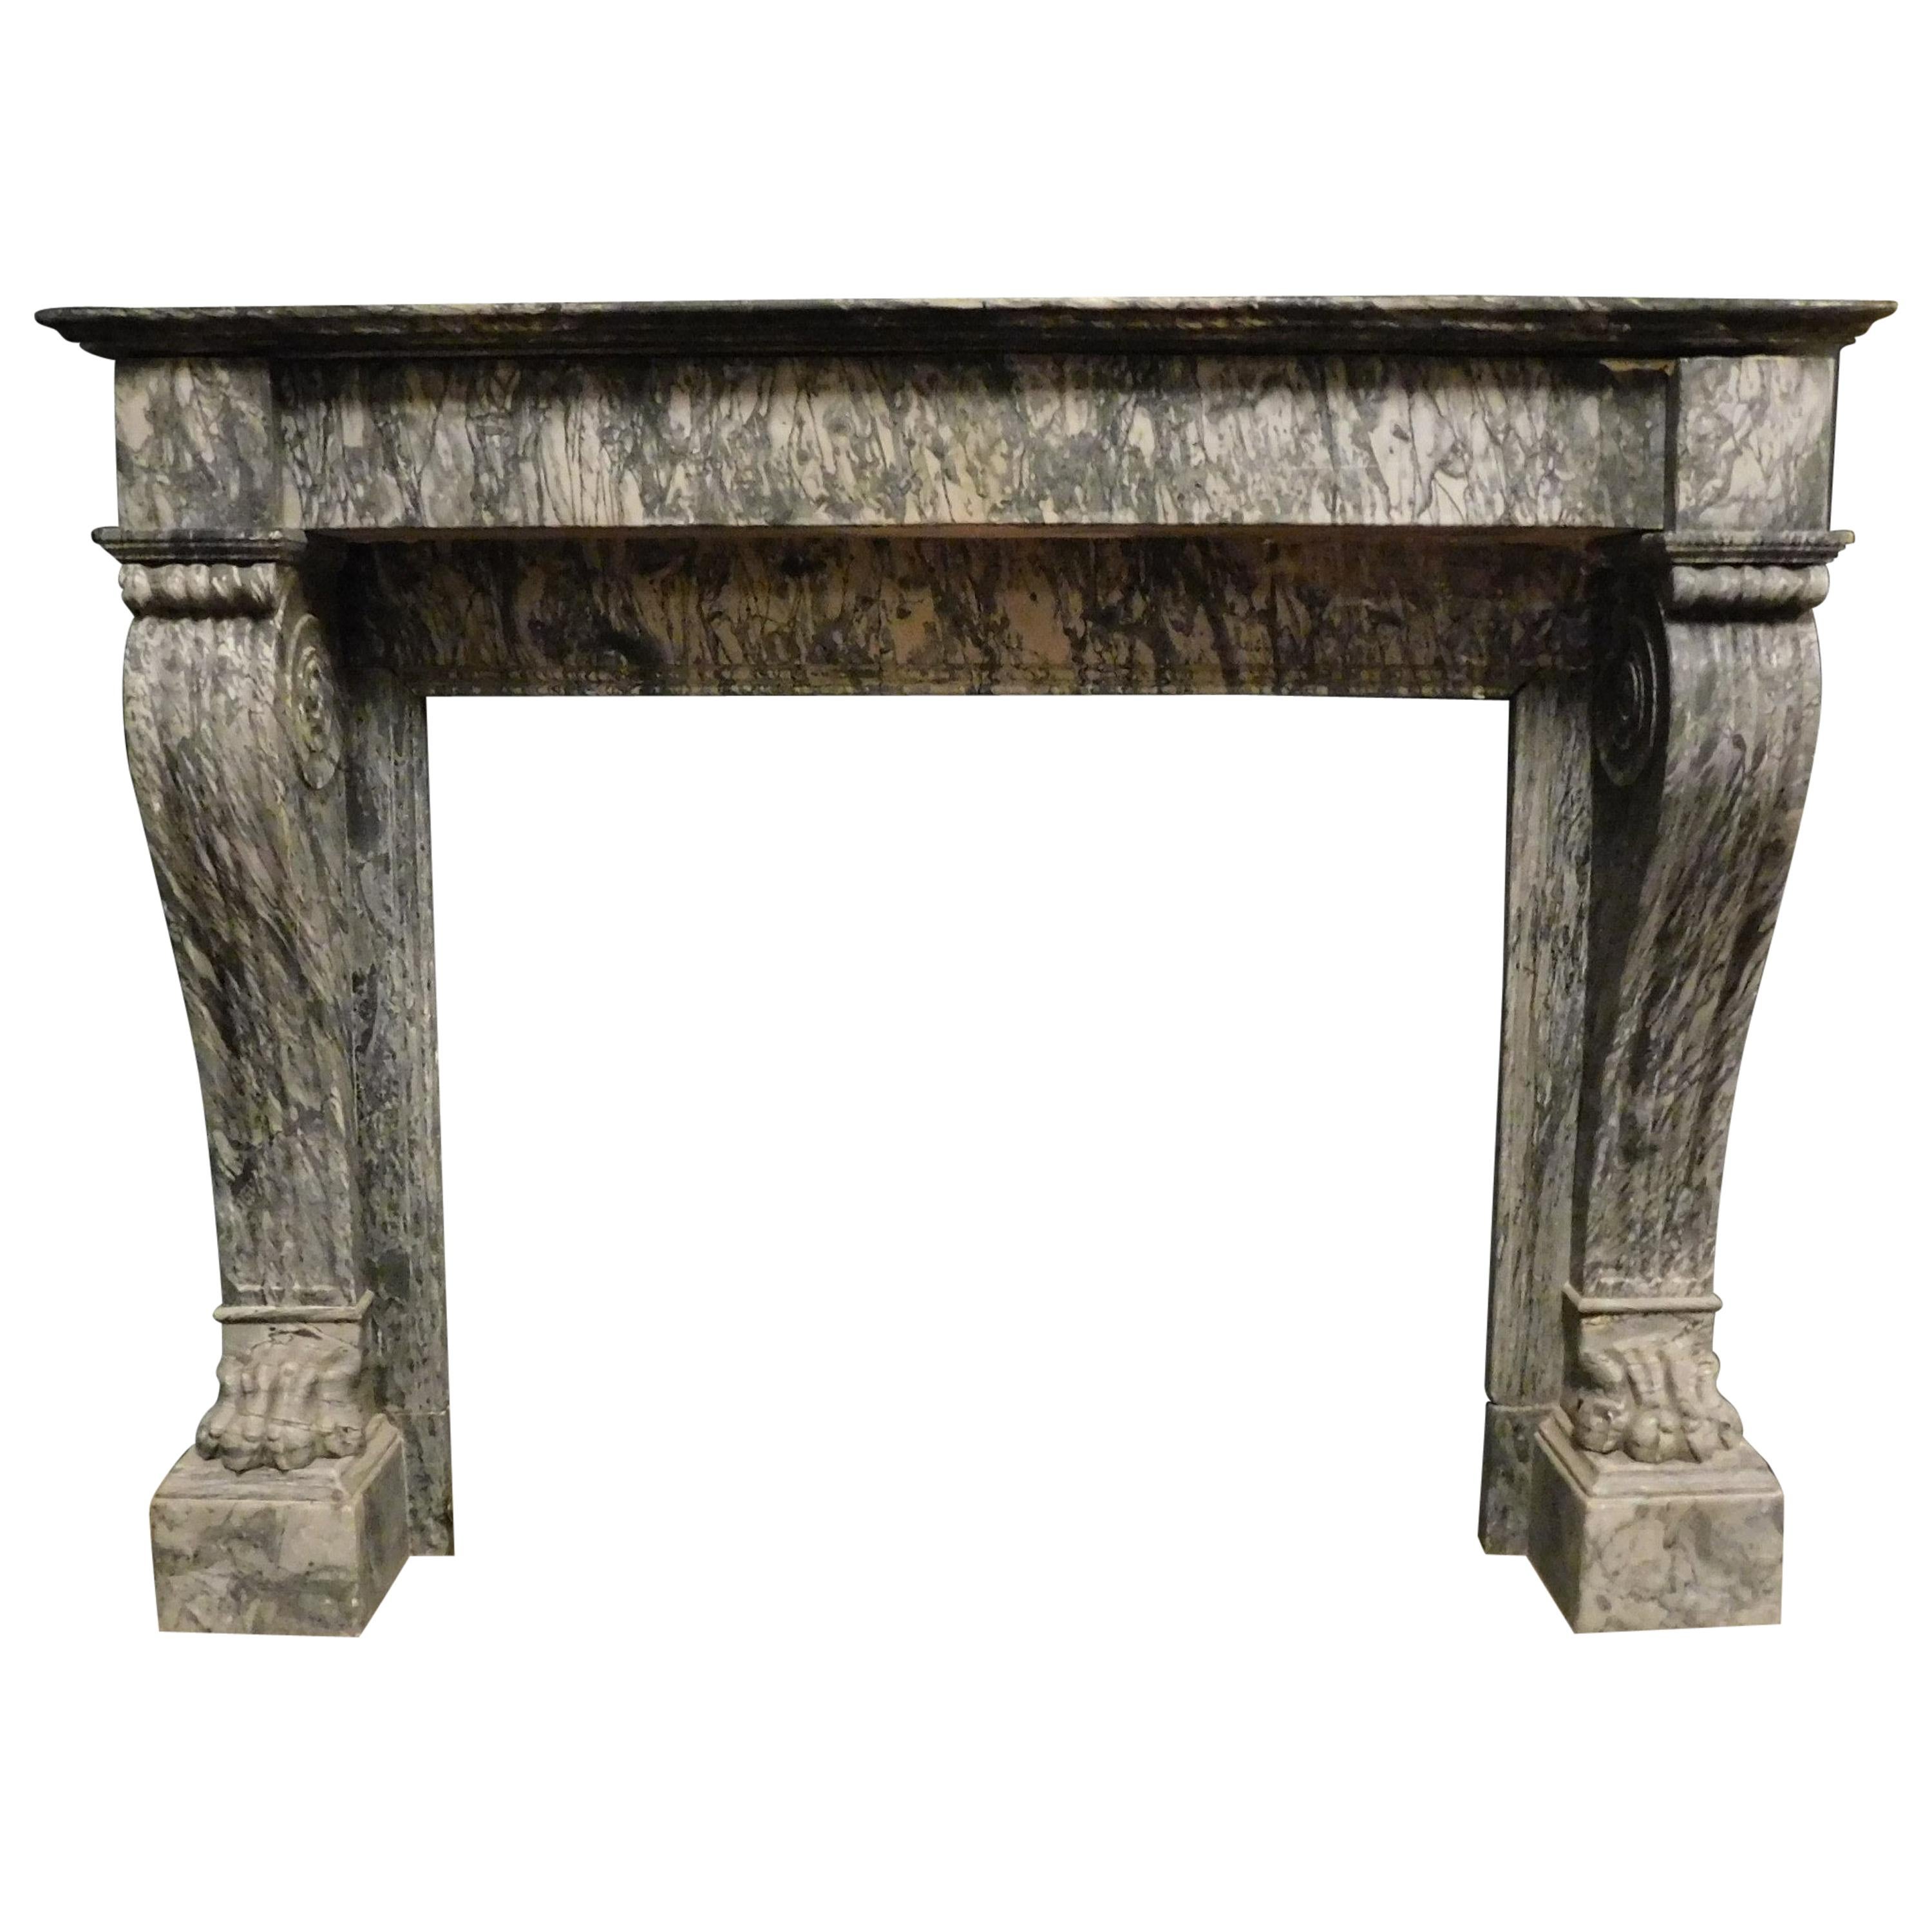 Antique Fireplace Mantel Gray Marble Carved with Lion's Paws, Empire Style, 1800 For Sale